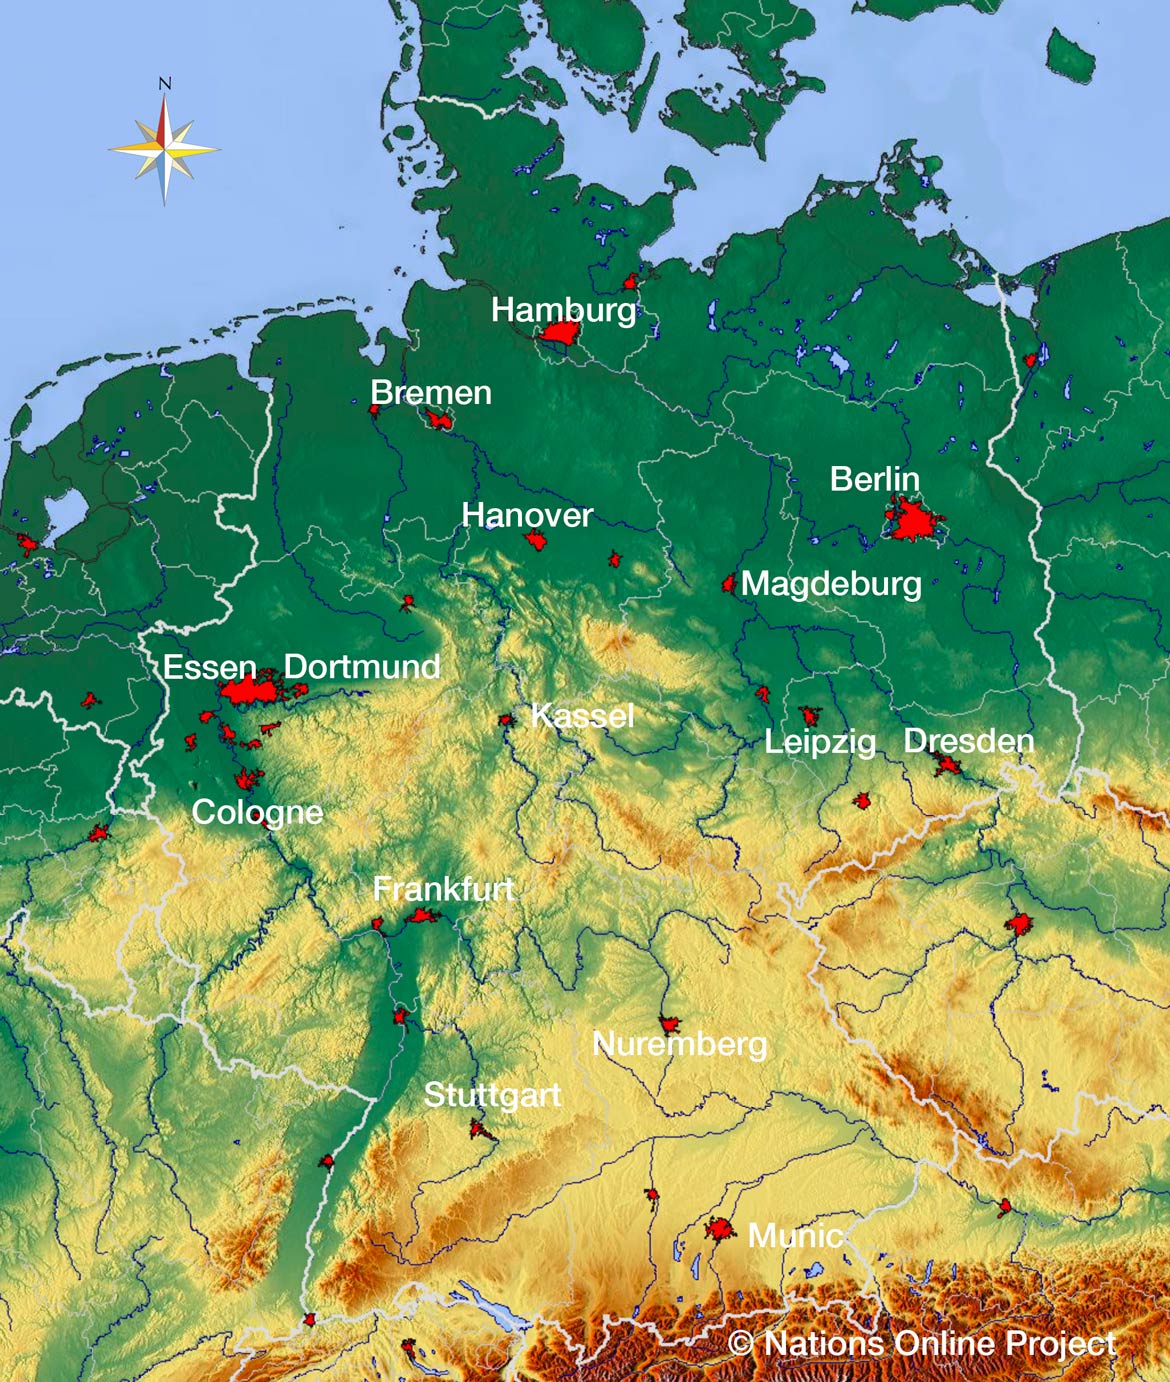 Topographic elevation map of Germany.